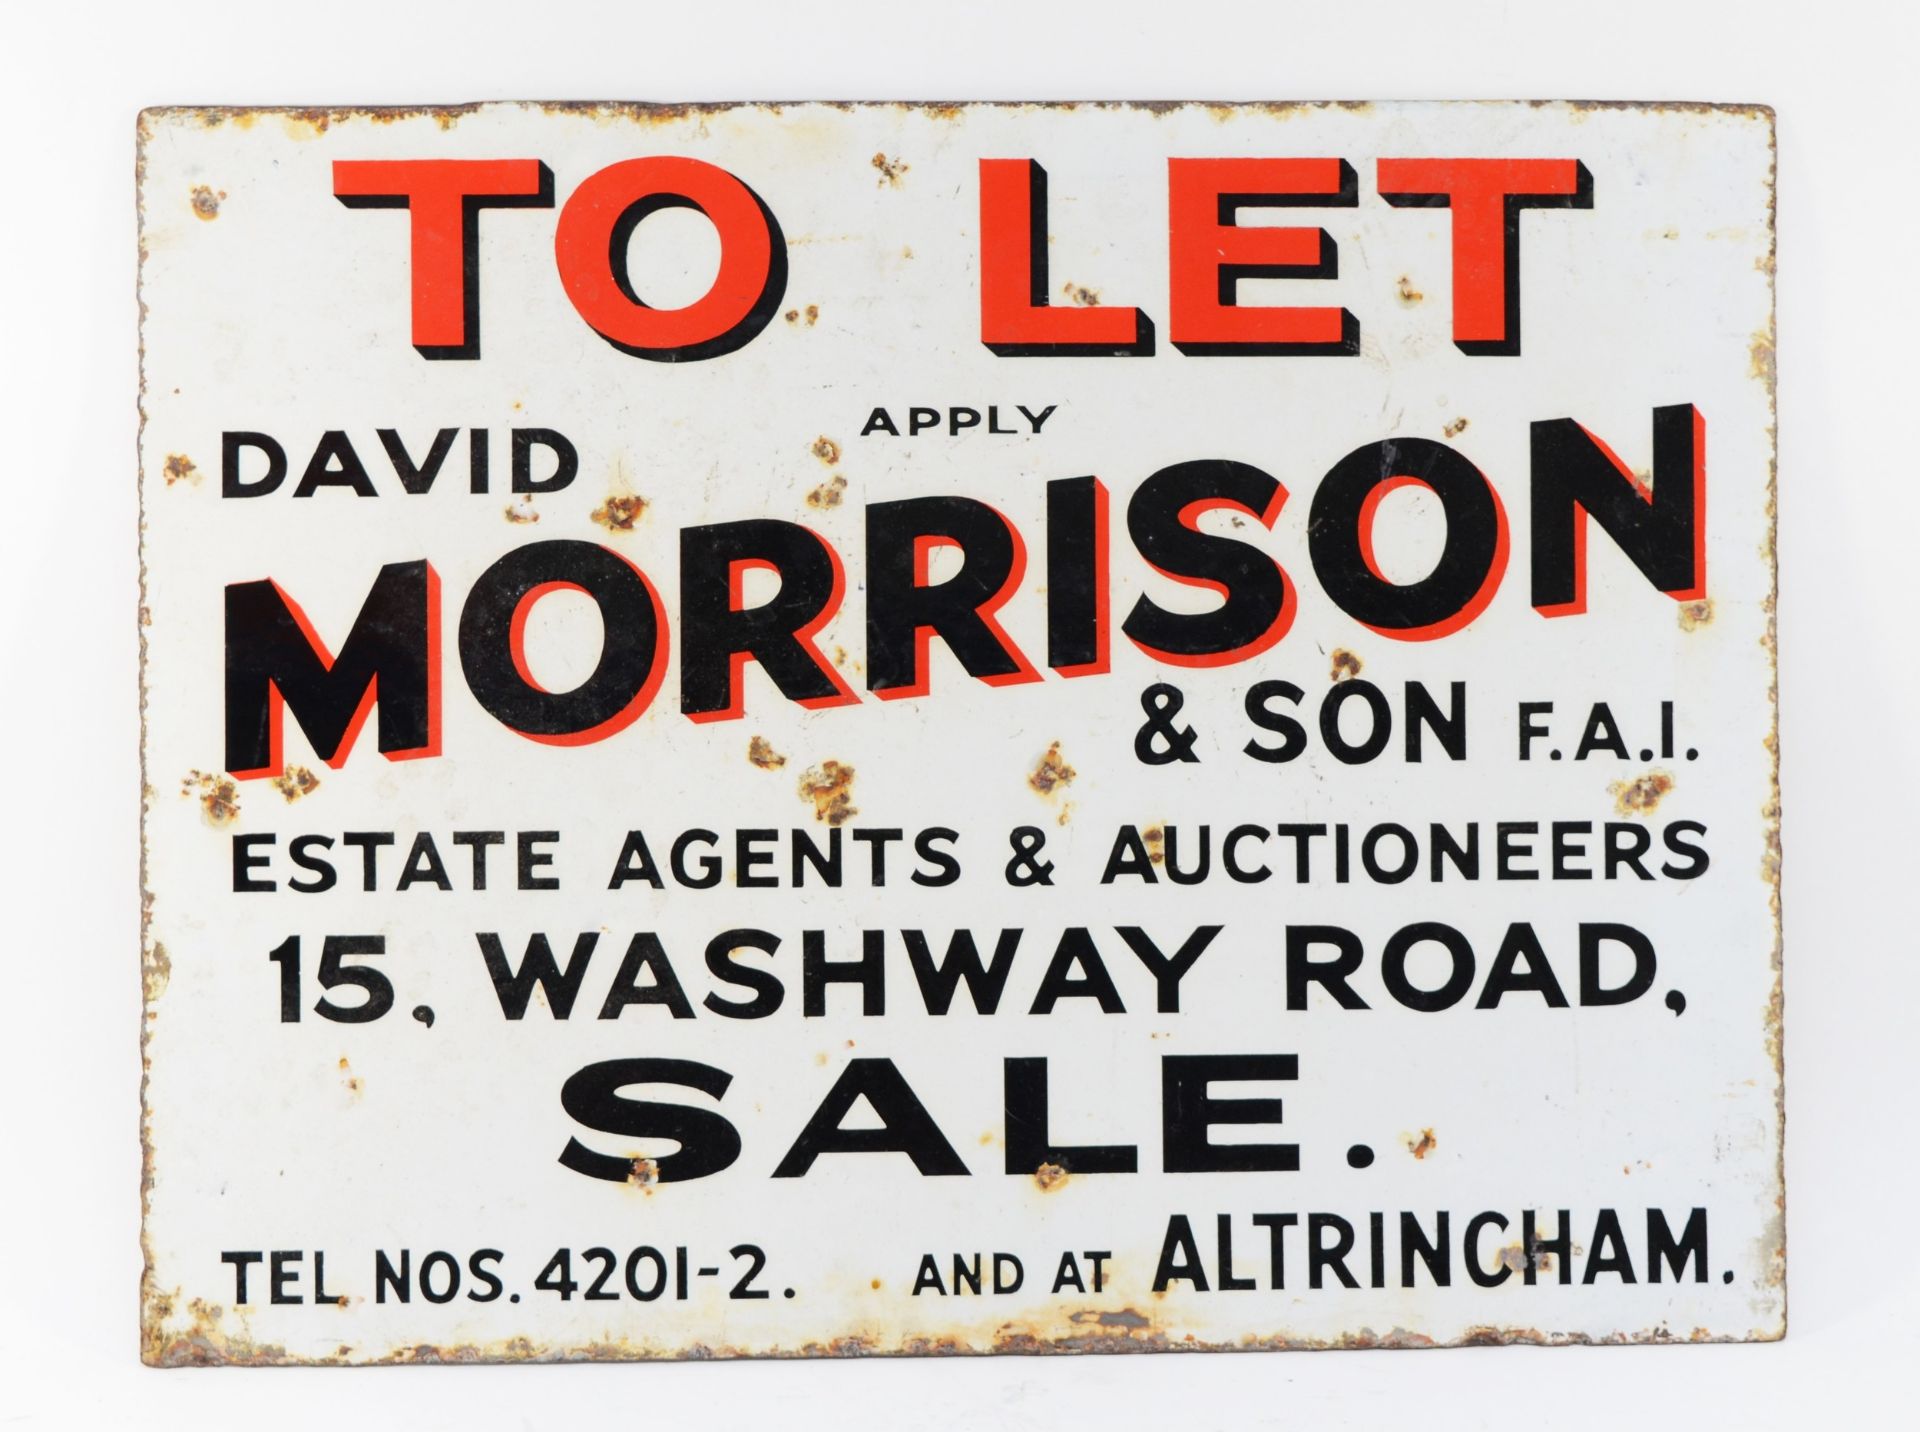 A To Let apply David Morrison & Son single sided vitreous enamel advertising sign, 54 x 40cm